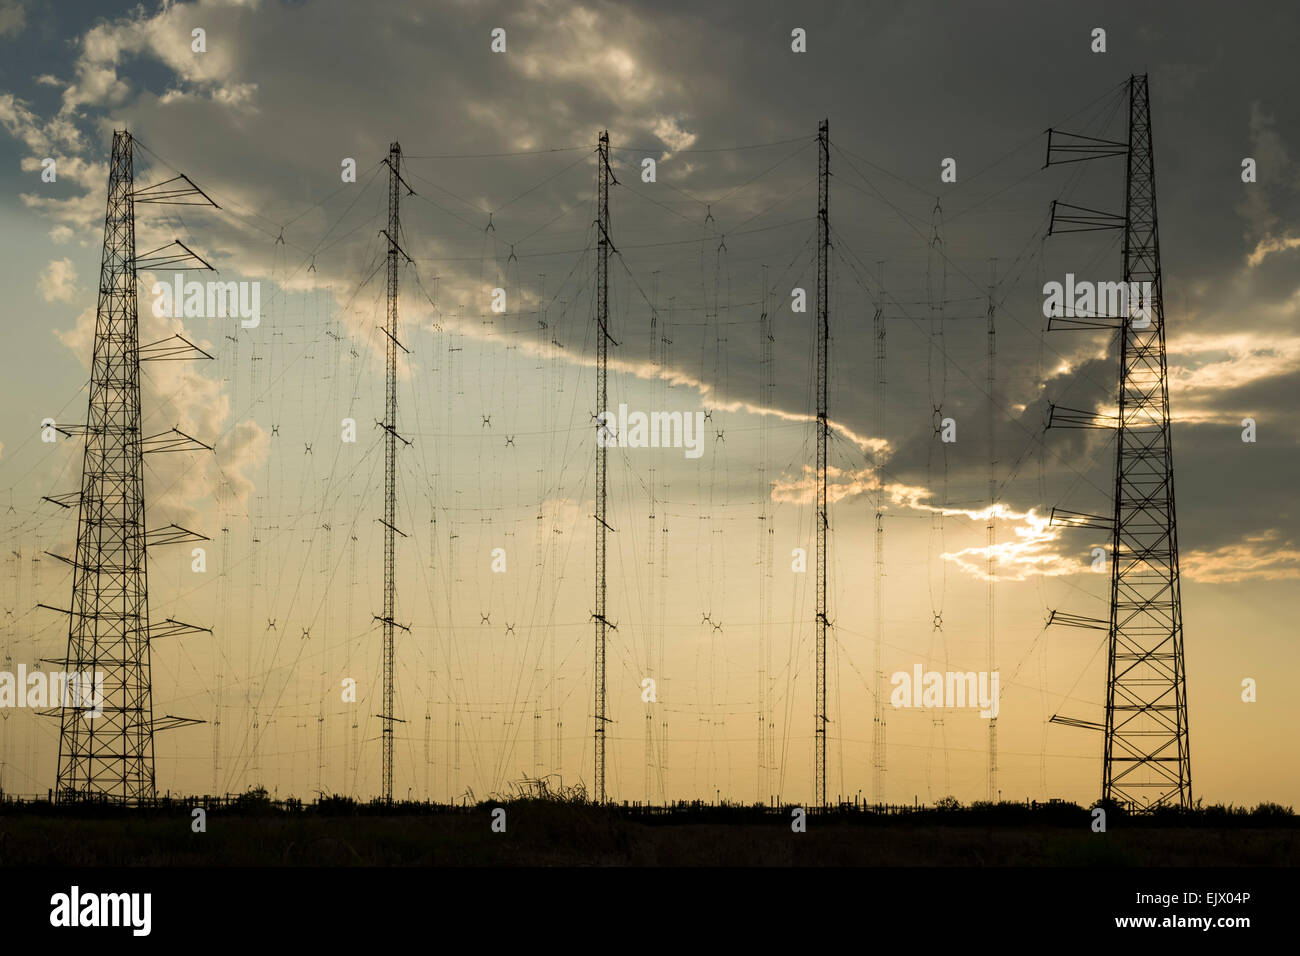 Array of radio communication antennas on cloudy sky background, at sunset Stock Photo